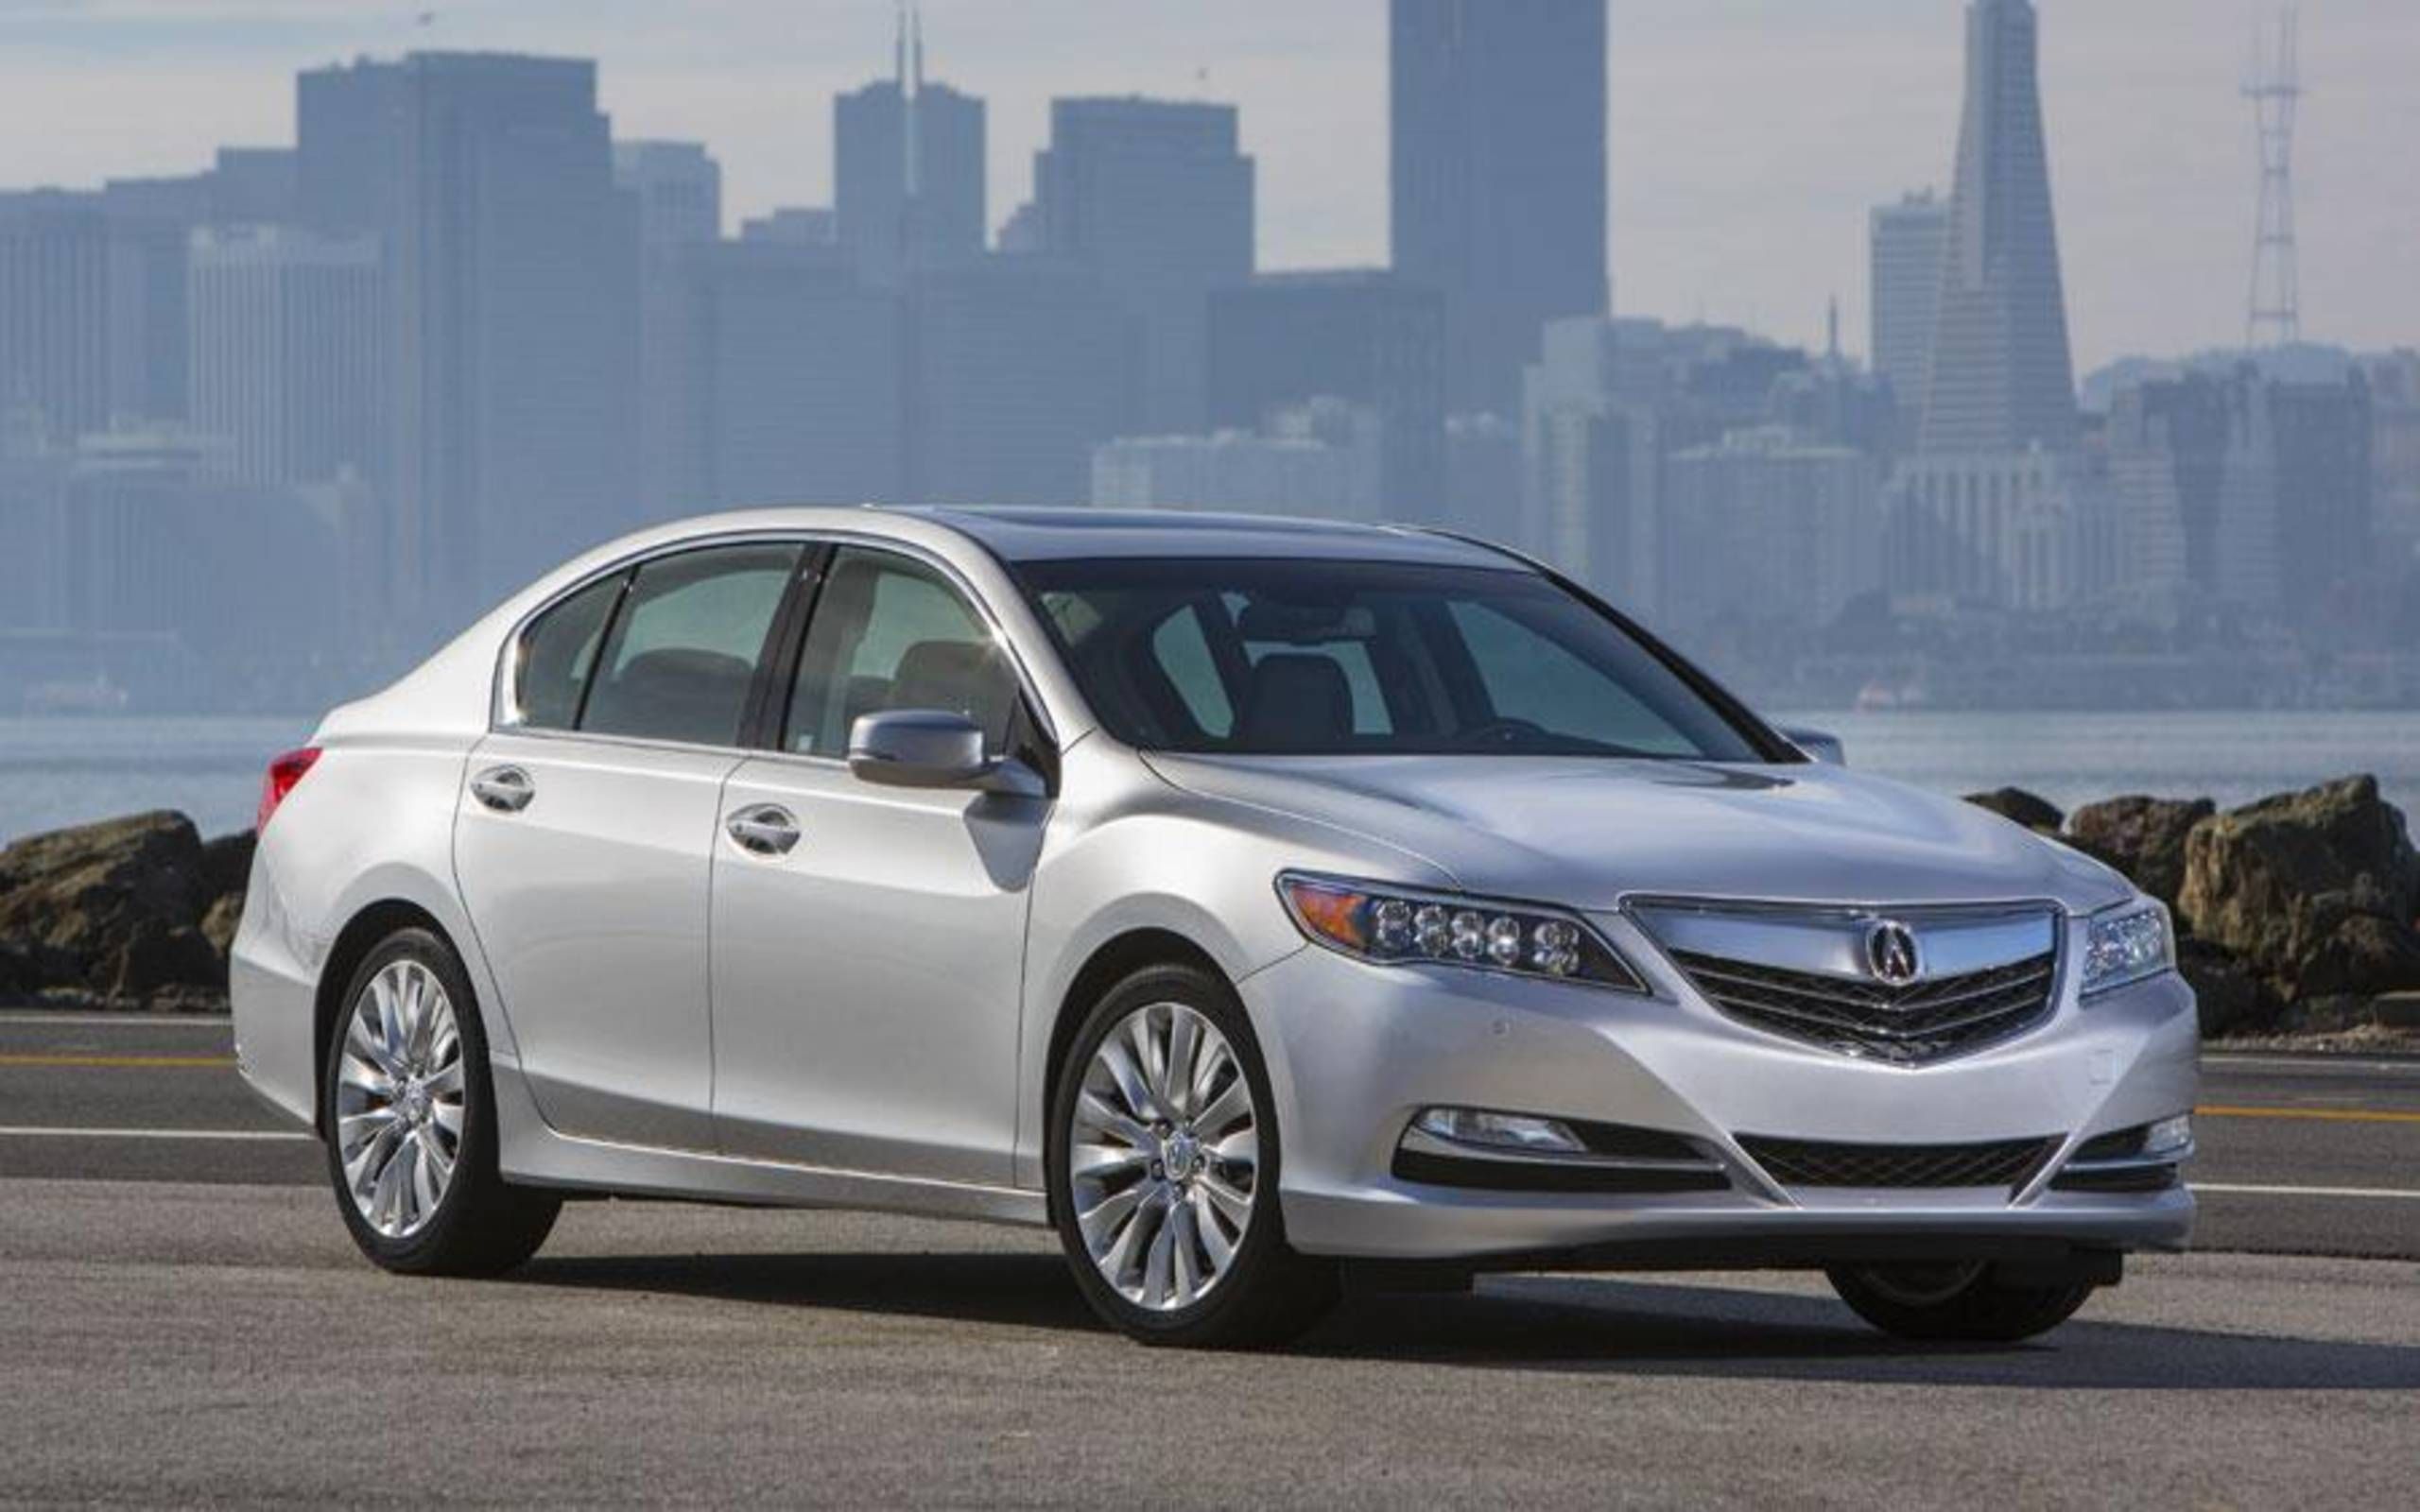 2014 Acura RLX priced at $49,345